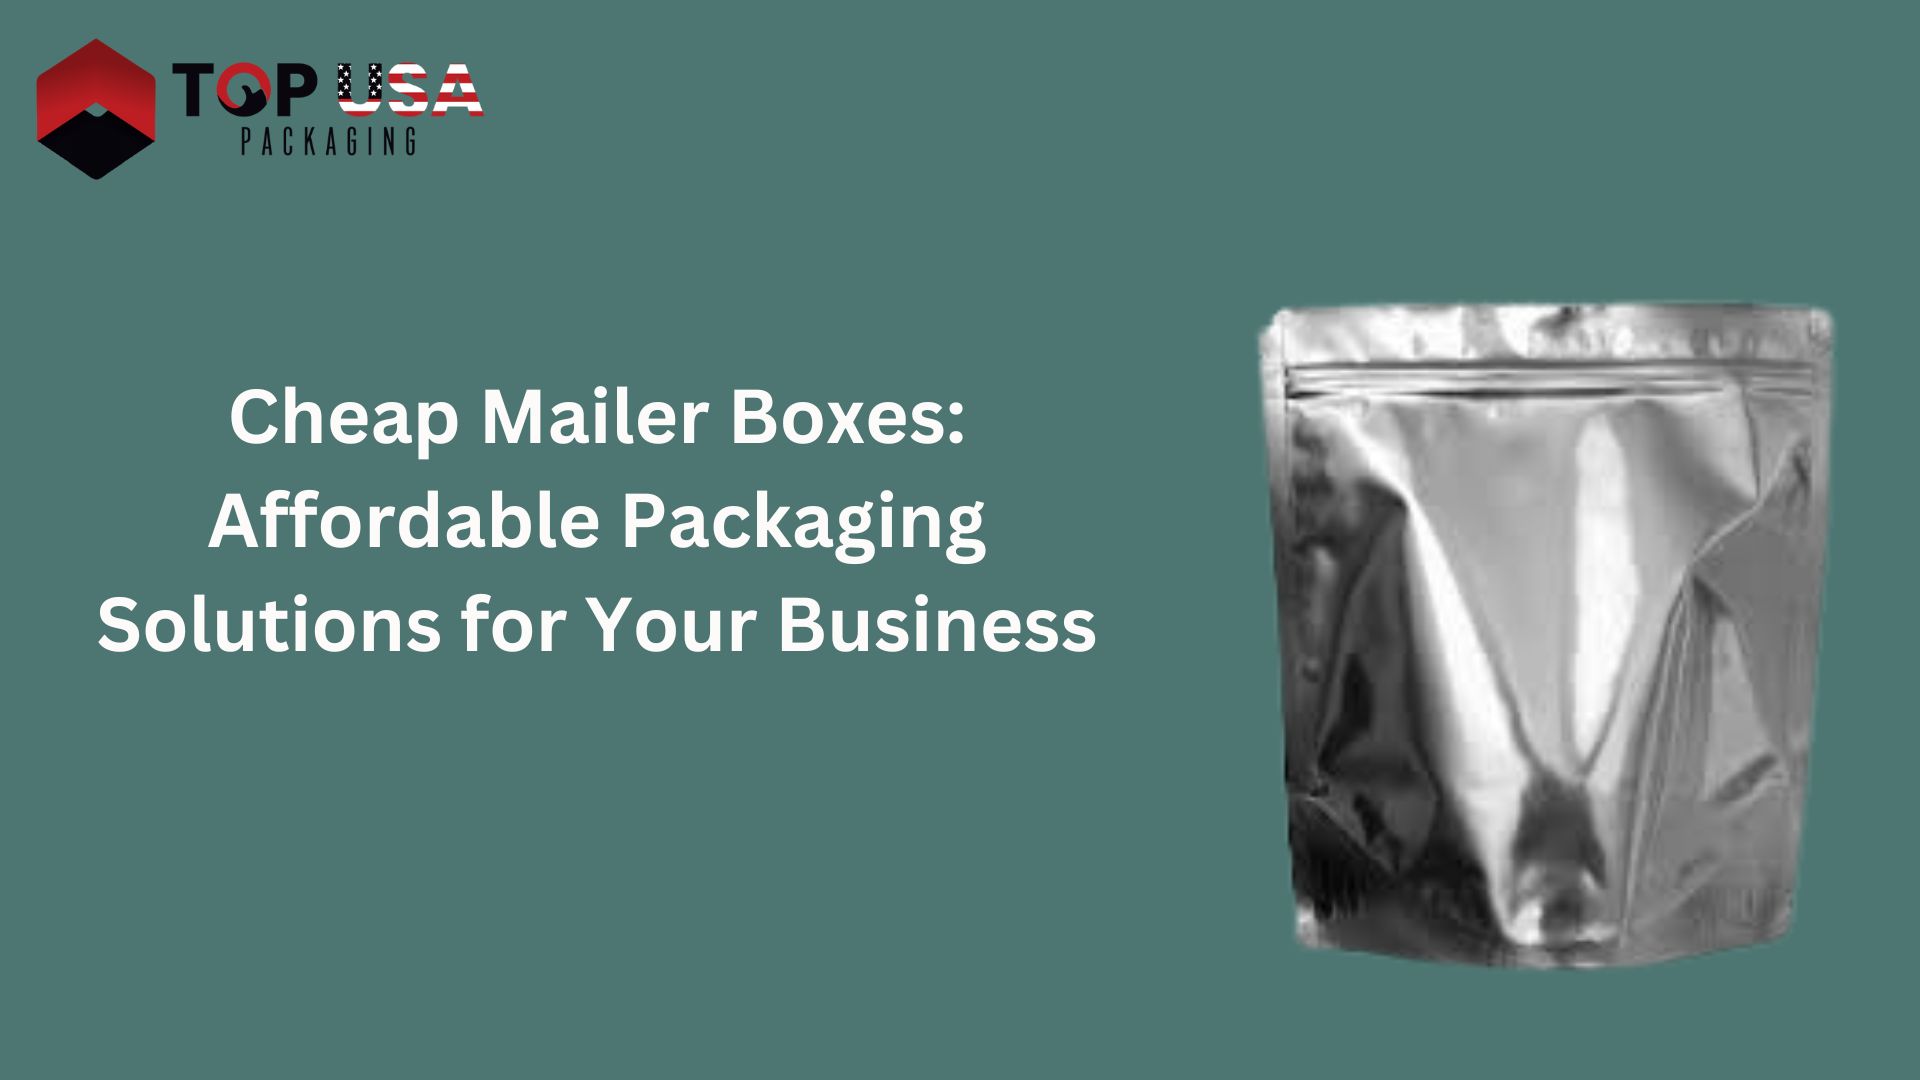 Cheap Mailer Boxes: Affordable Packaging Solutions for Your Business